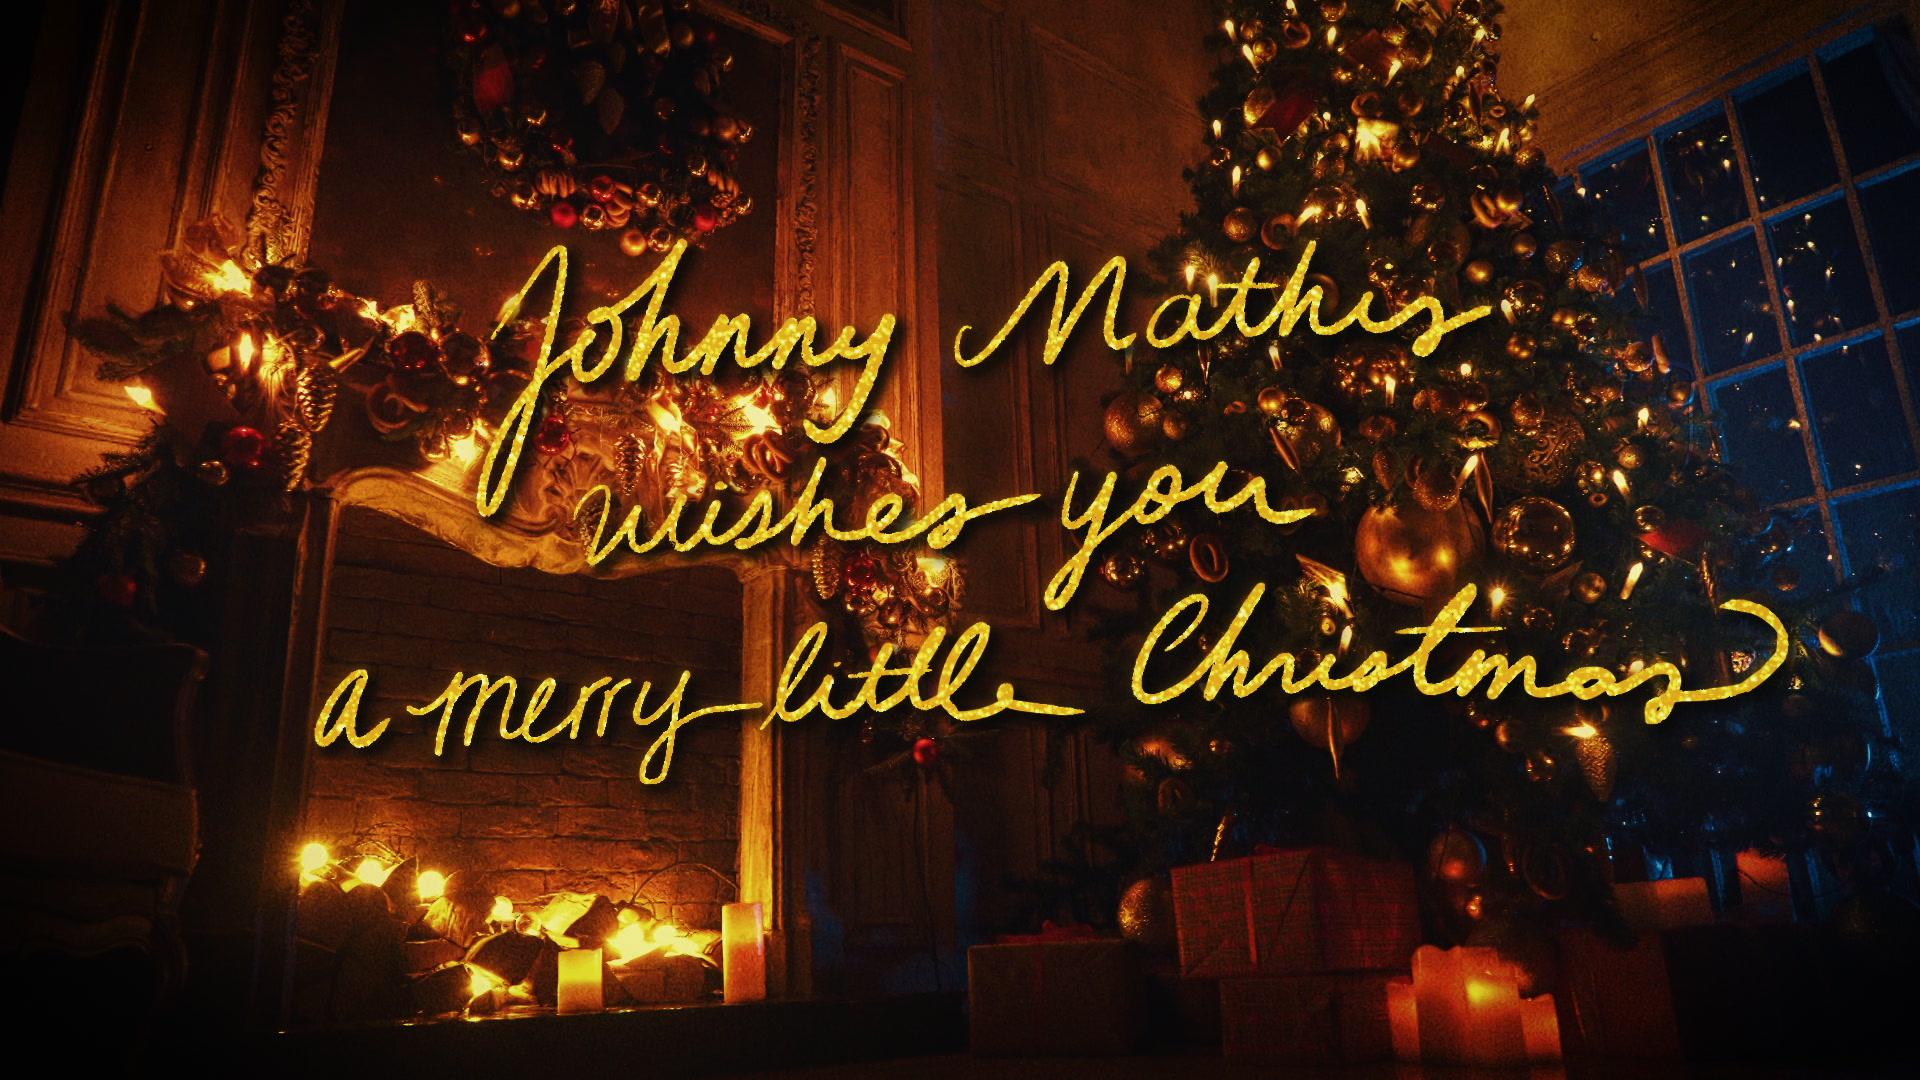 Johnny Mathis - Have Yourself a Merry Little Christmas (Official Video)